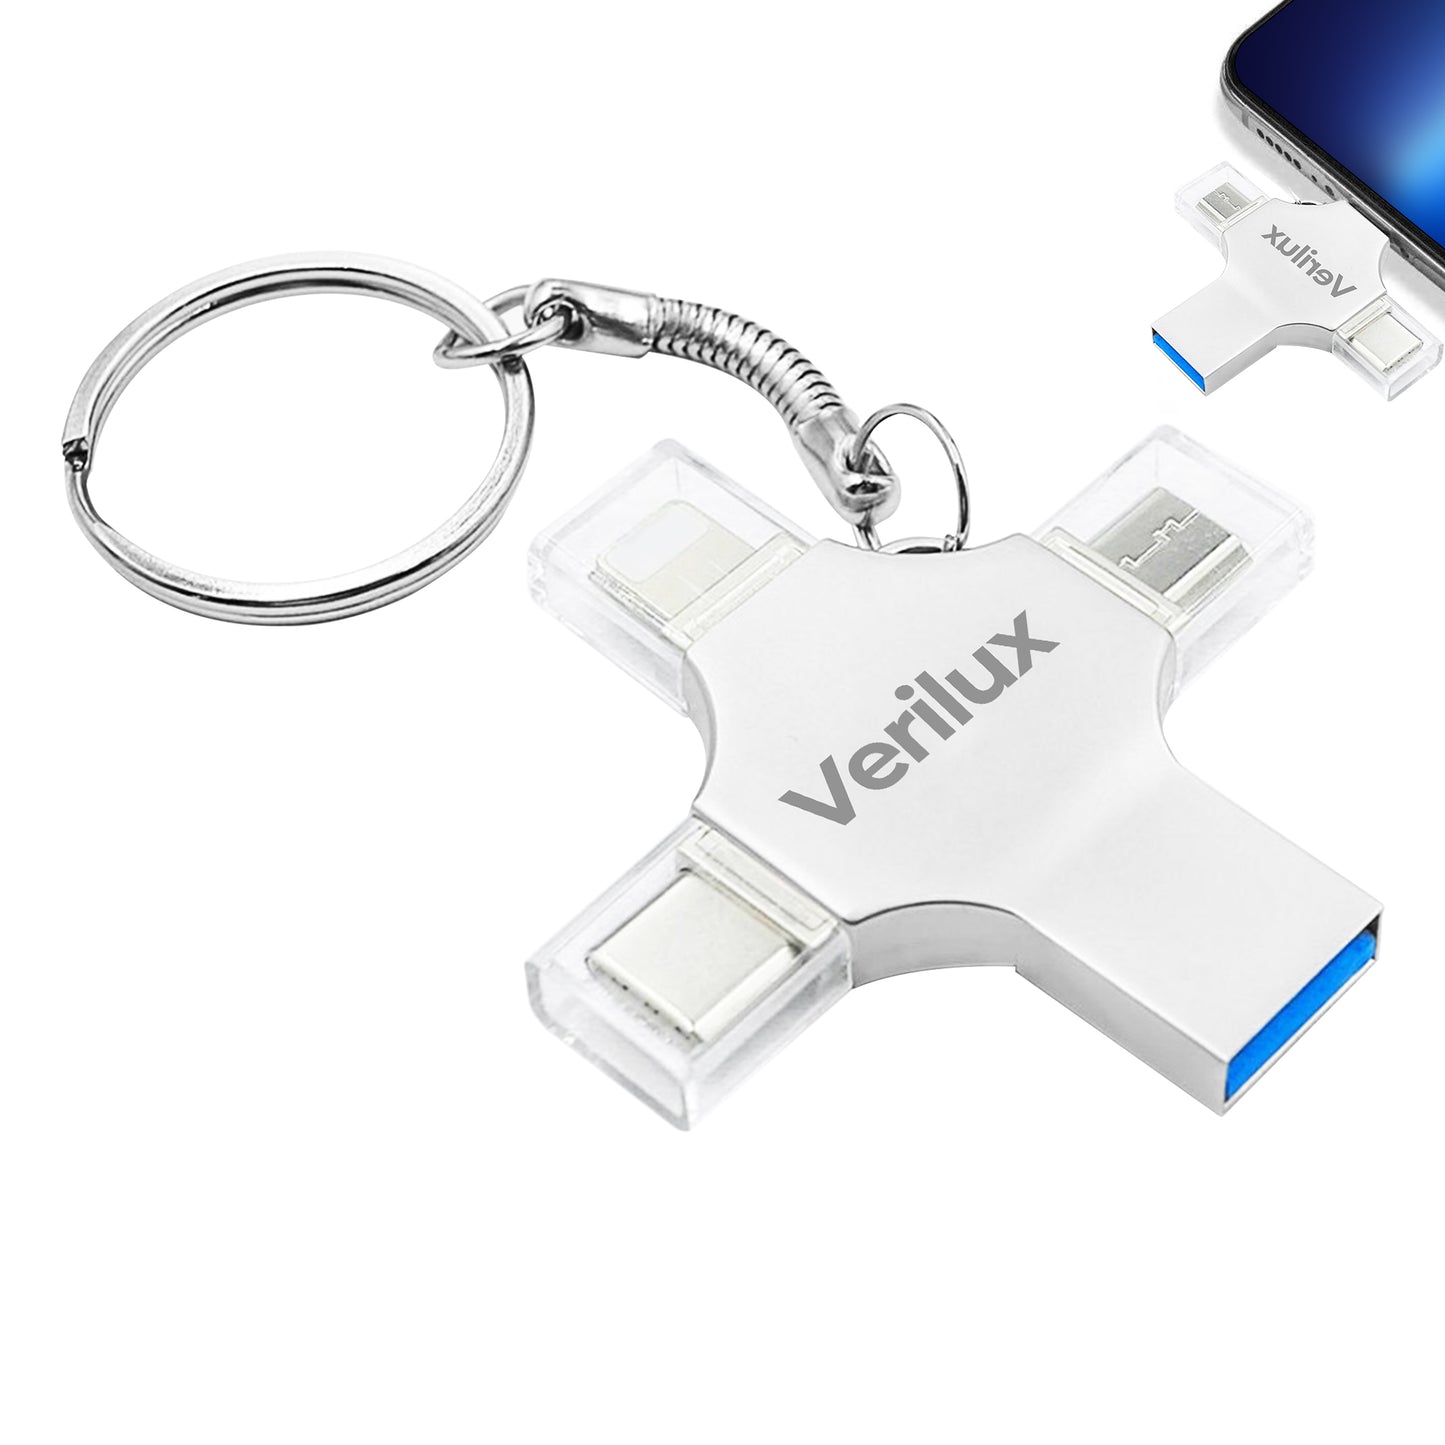 Verilux Pendrive 128GB 4 in 1 Flash Drive with Light-ning, Micro USB, USB A, Type-C Interface Mini Hangable PenDrive for iOS & Android Compatible with iPhone, iPad, Android, PC and More Devices